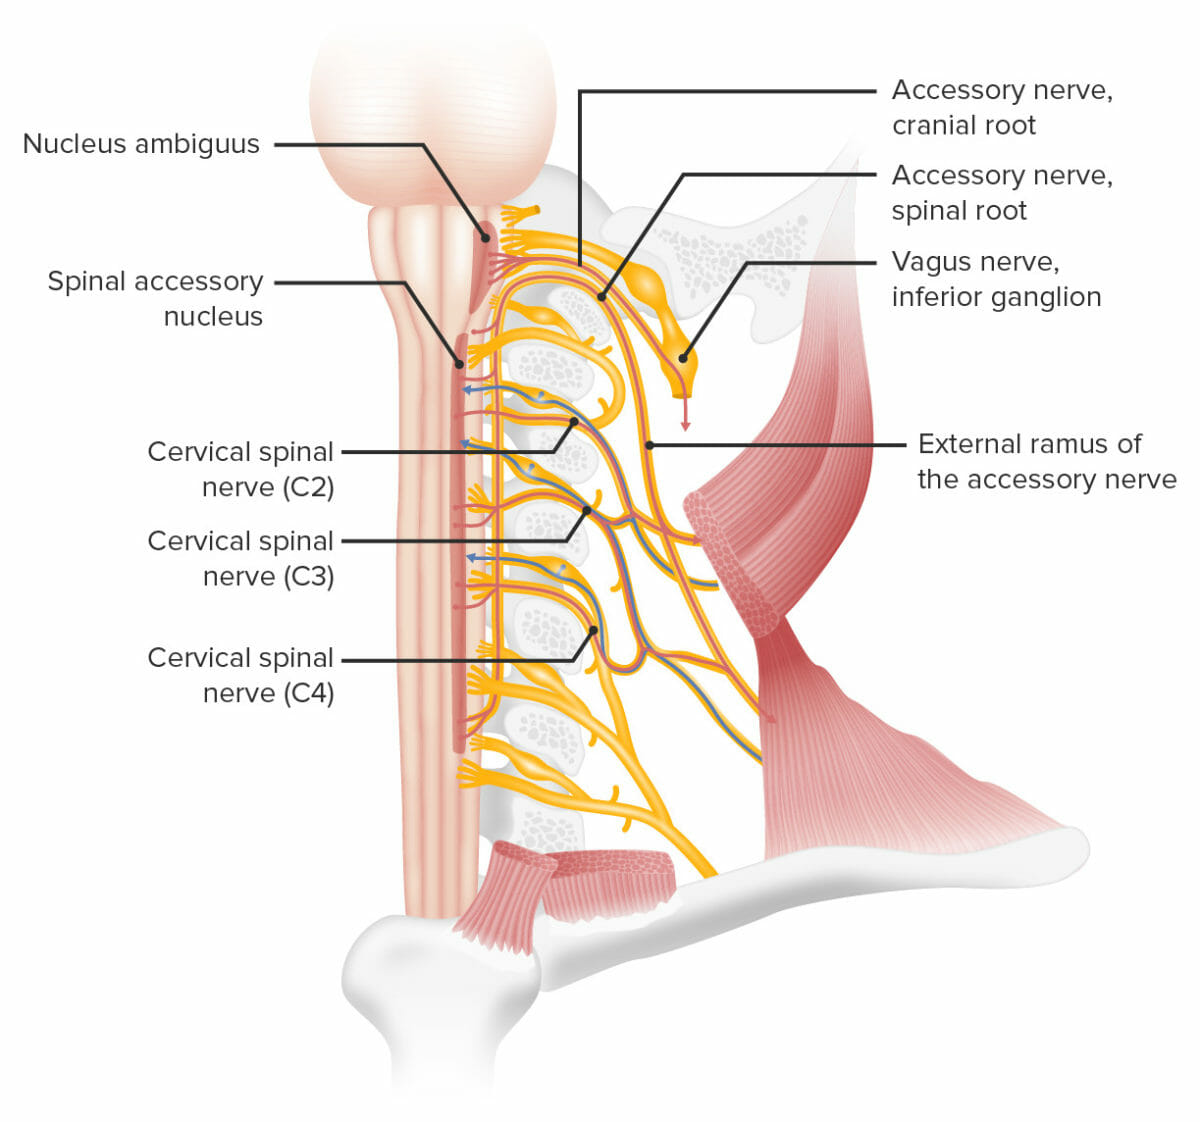 Innervation of the sternocleidomastoid and trapezius muscles by cn xi